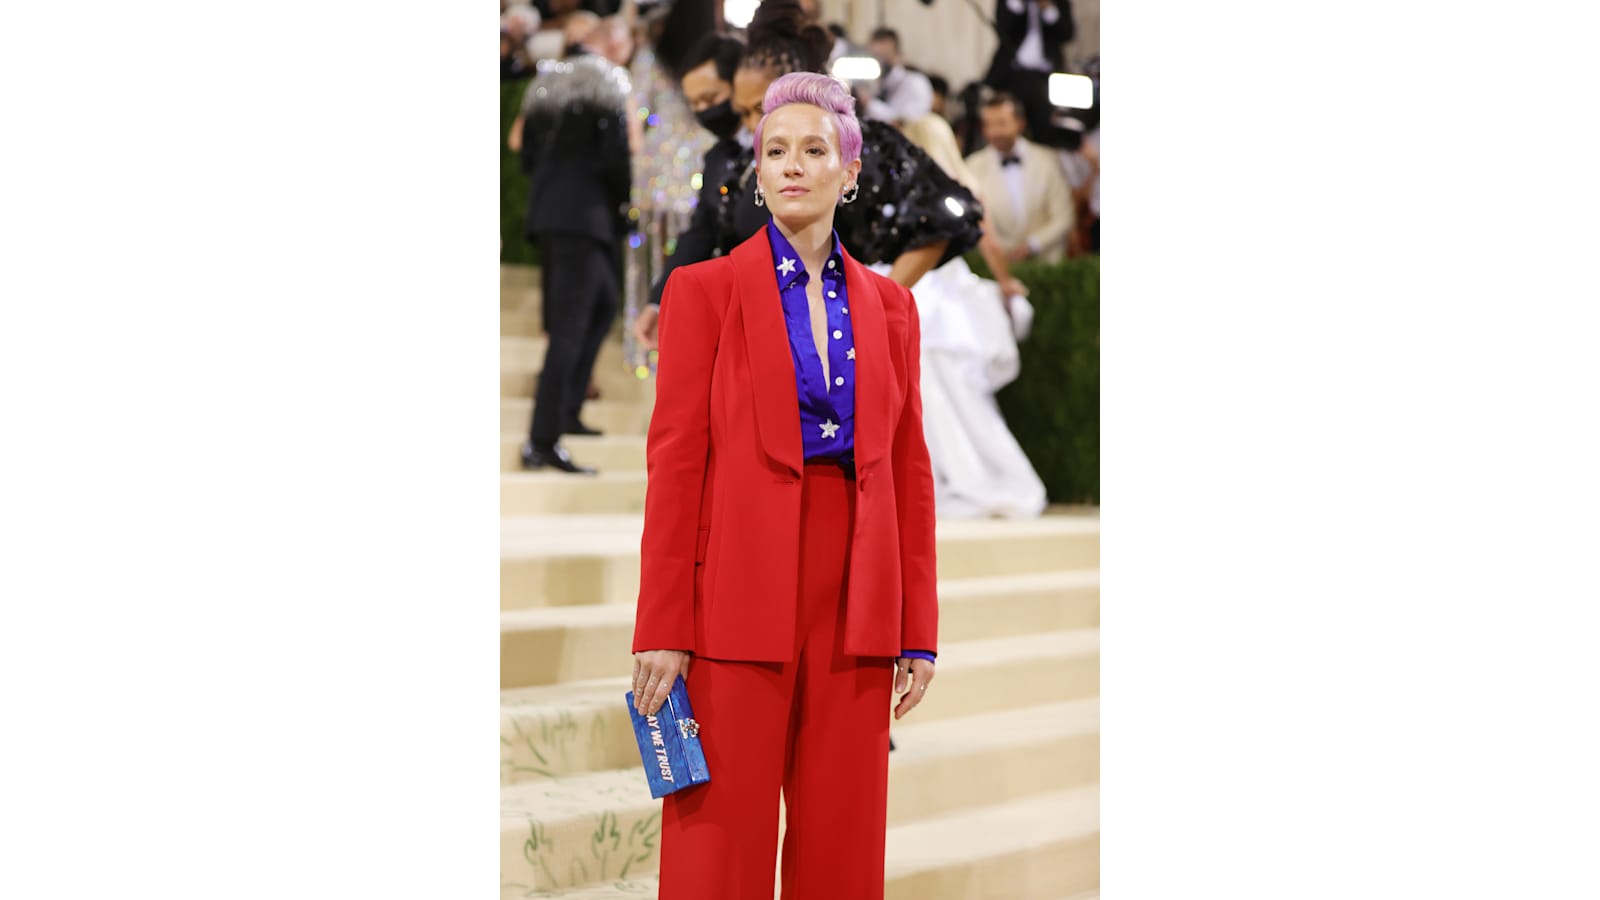 #EileenGu steps out for the #MetGala #redcarpet. #MetBall #olympian #l